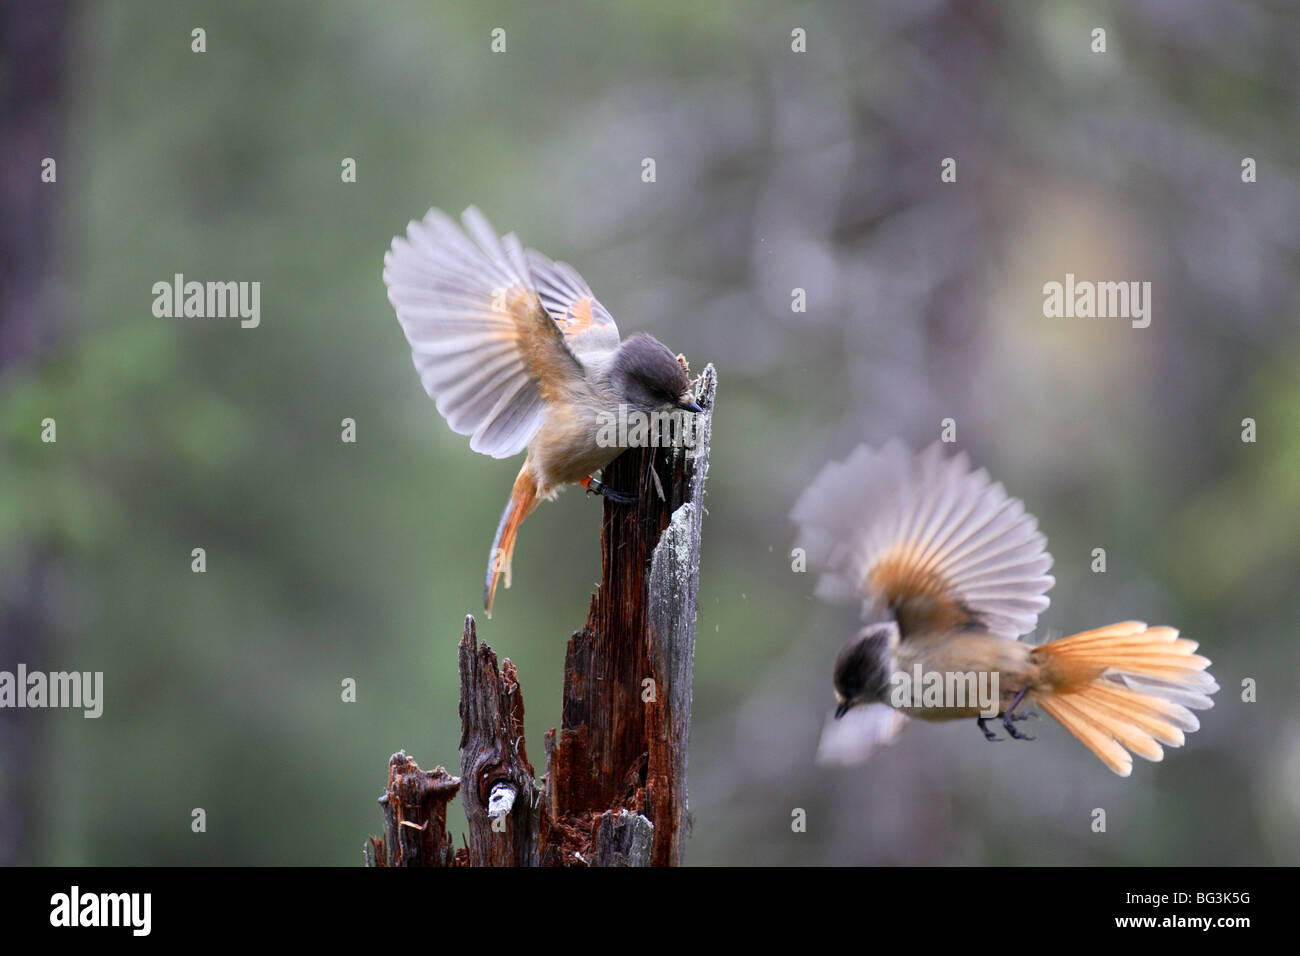 siberian jay in flight in old forest environnement in boreal climate Stock Photo